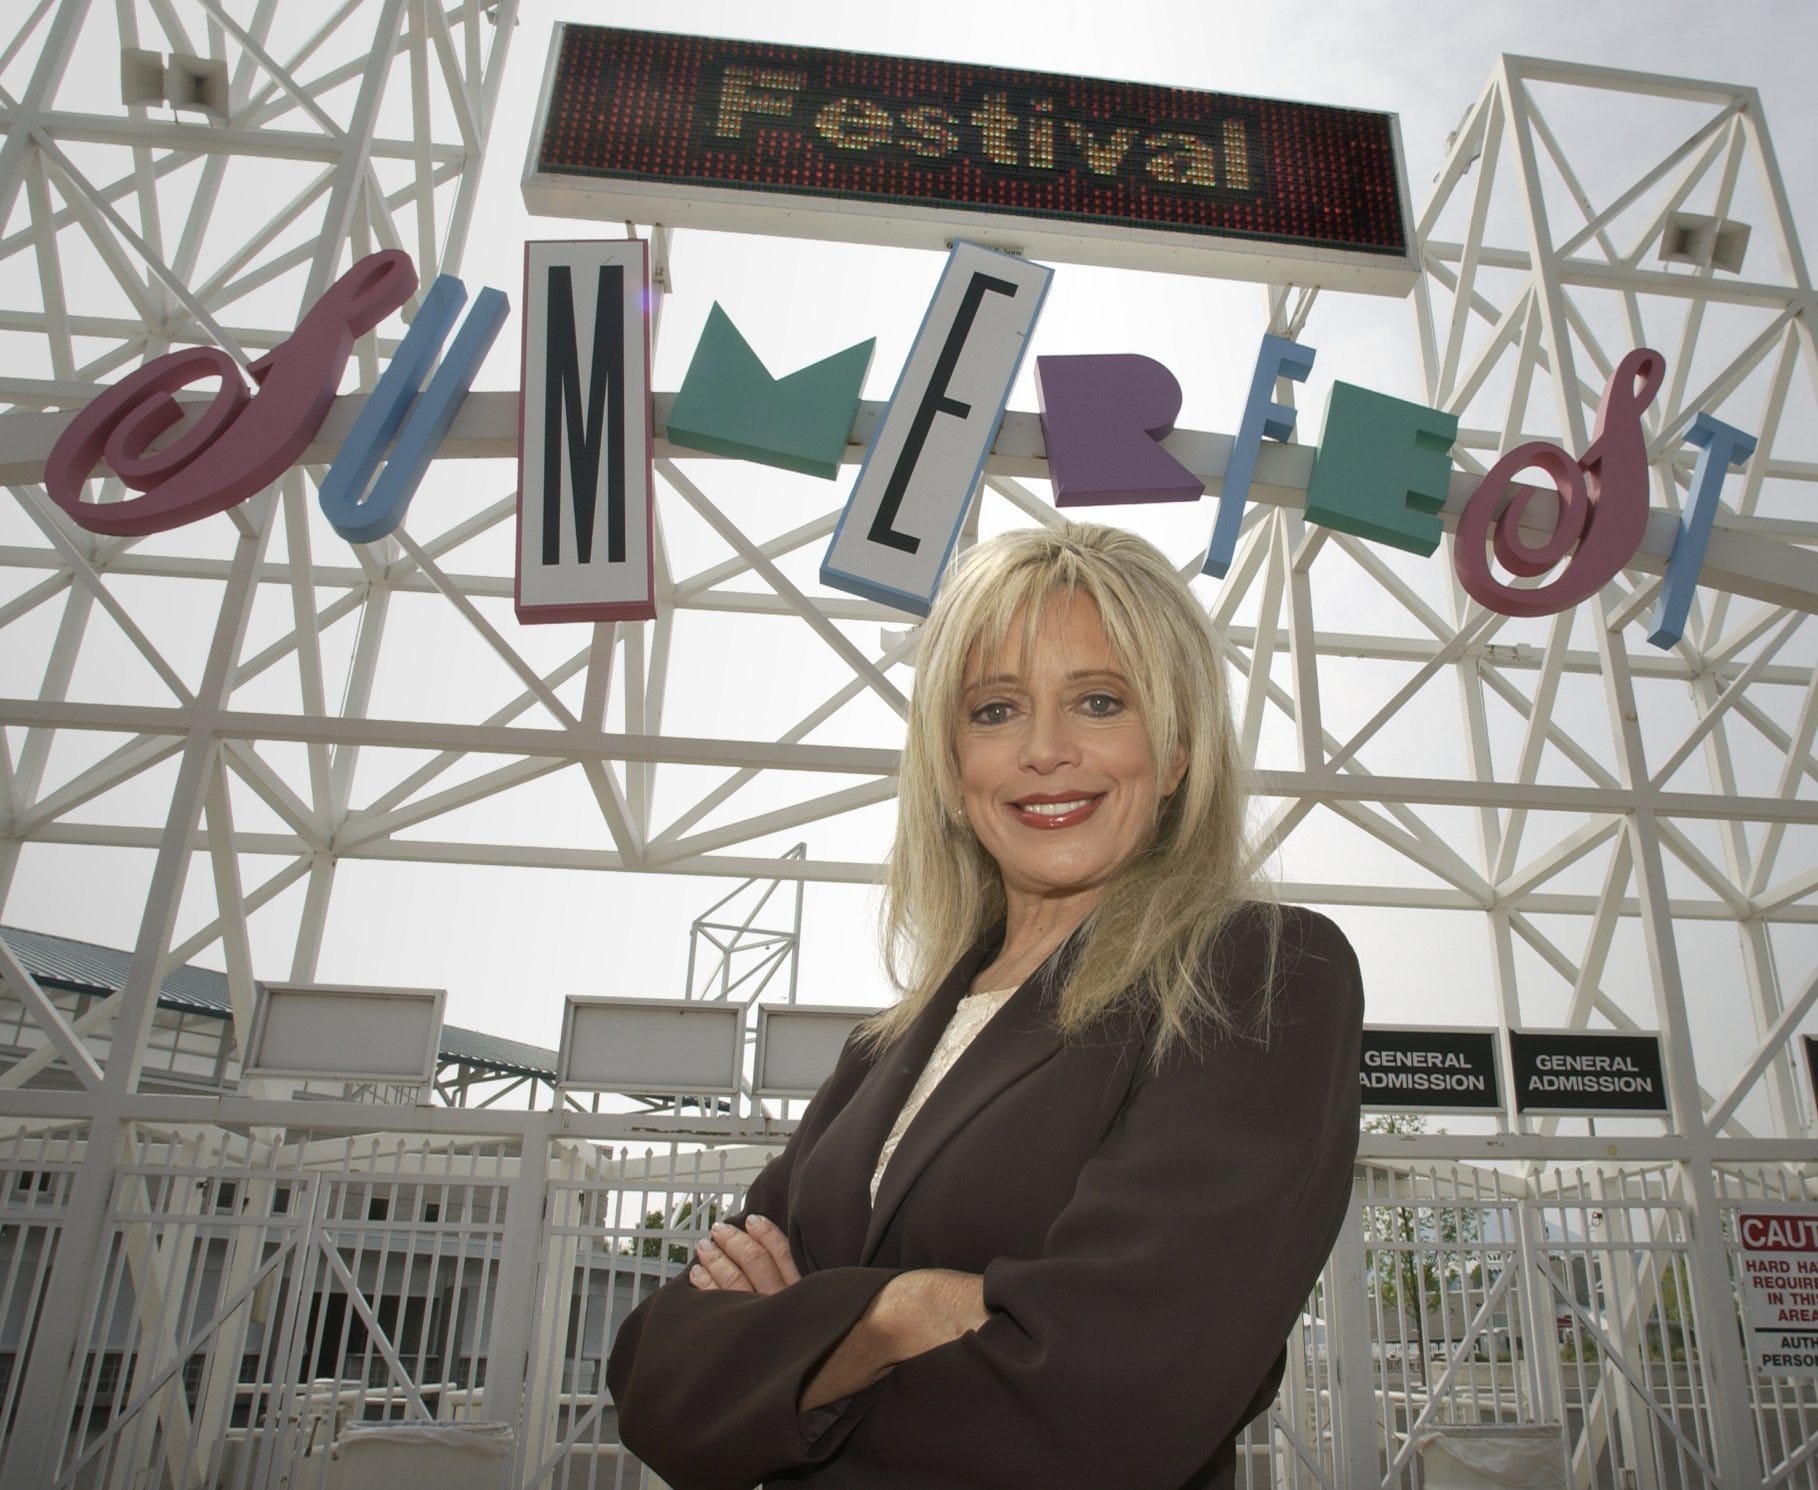 Bo Black, photographed June 13, 2003, at the north entrance of the Summerfest grounds.